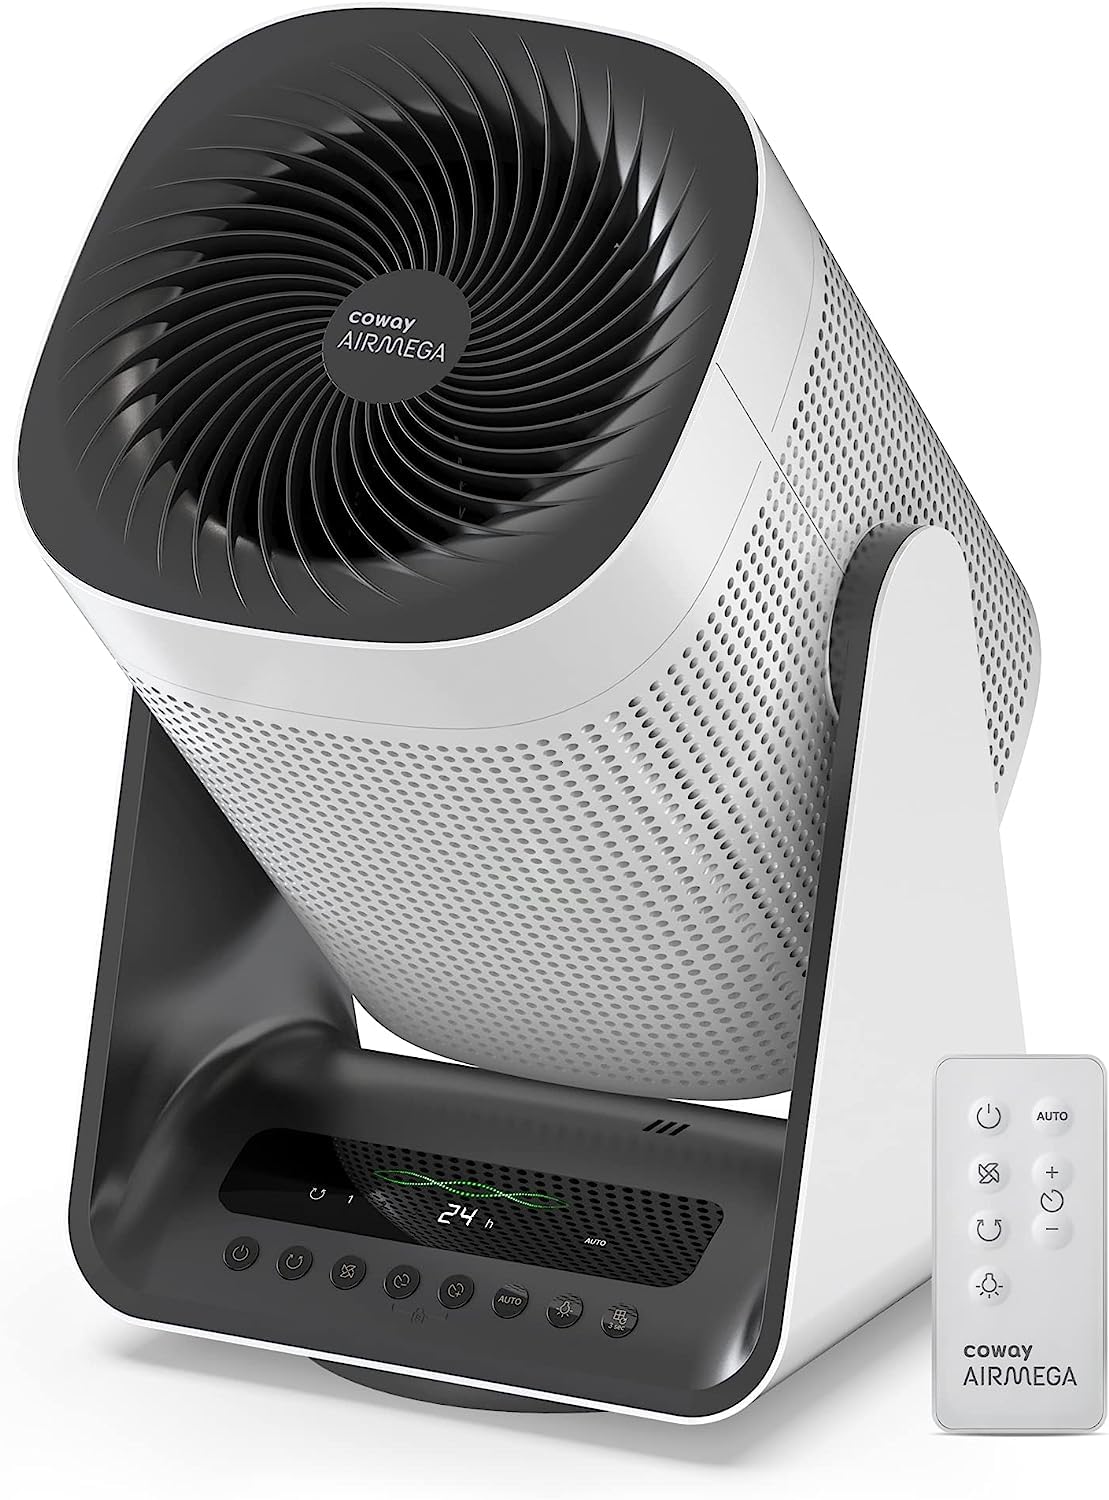 latest Coway Air Purifier in India around rs. 10,000